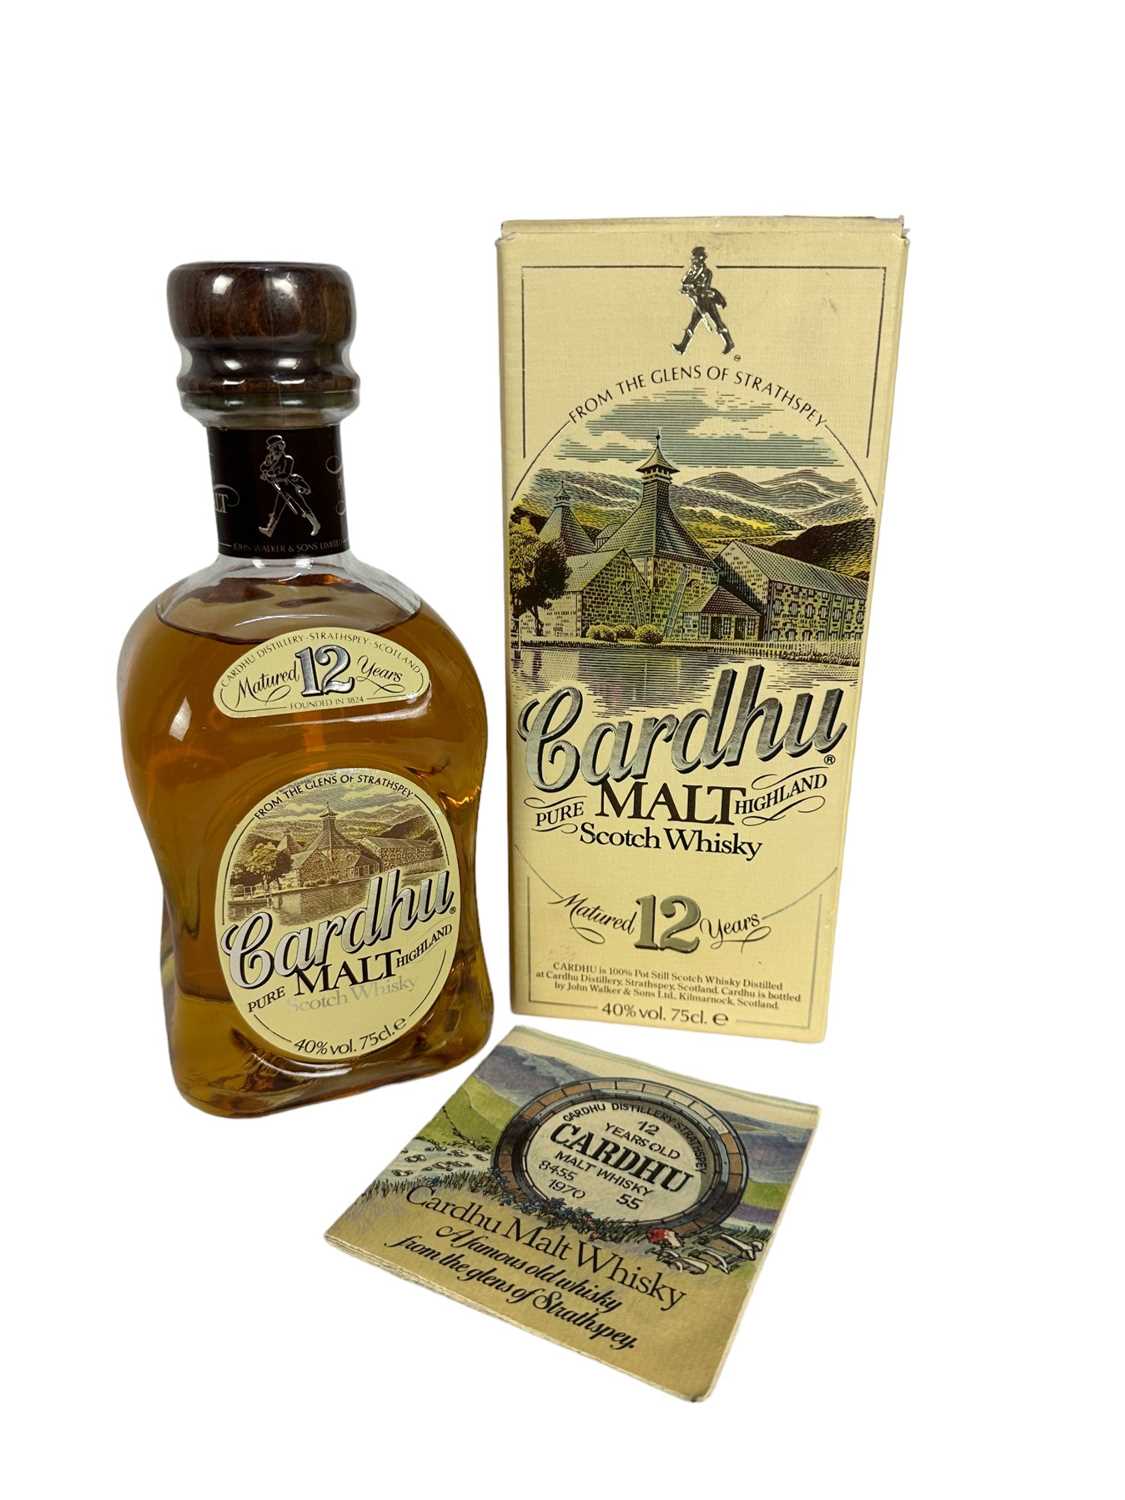 Lot 12 - Whisky - one bottle, Cardhu 12 year old, 1970, 40%, 75cl., in orignal card box